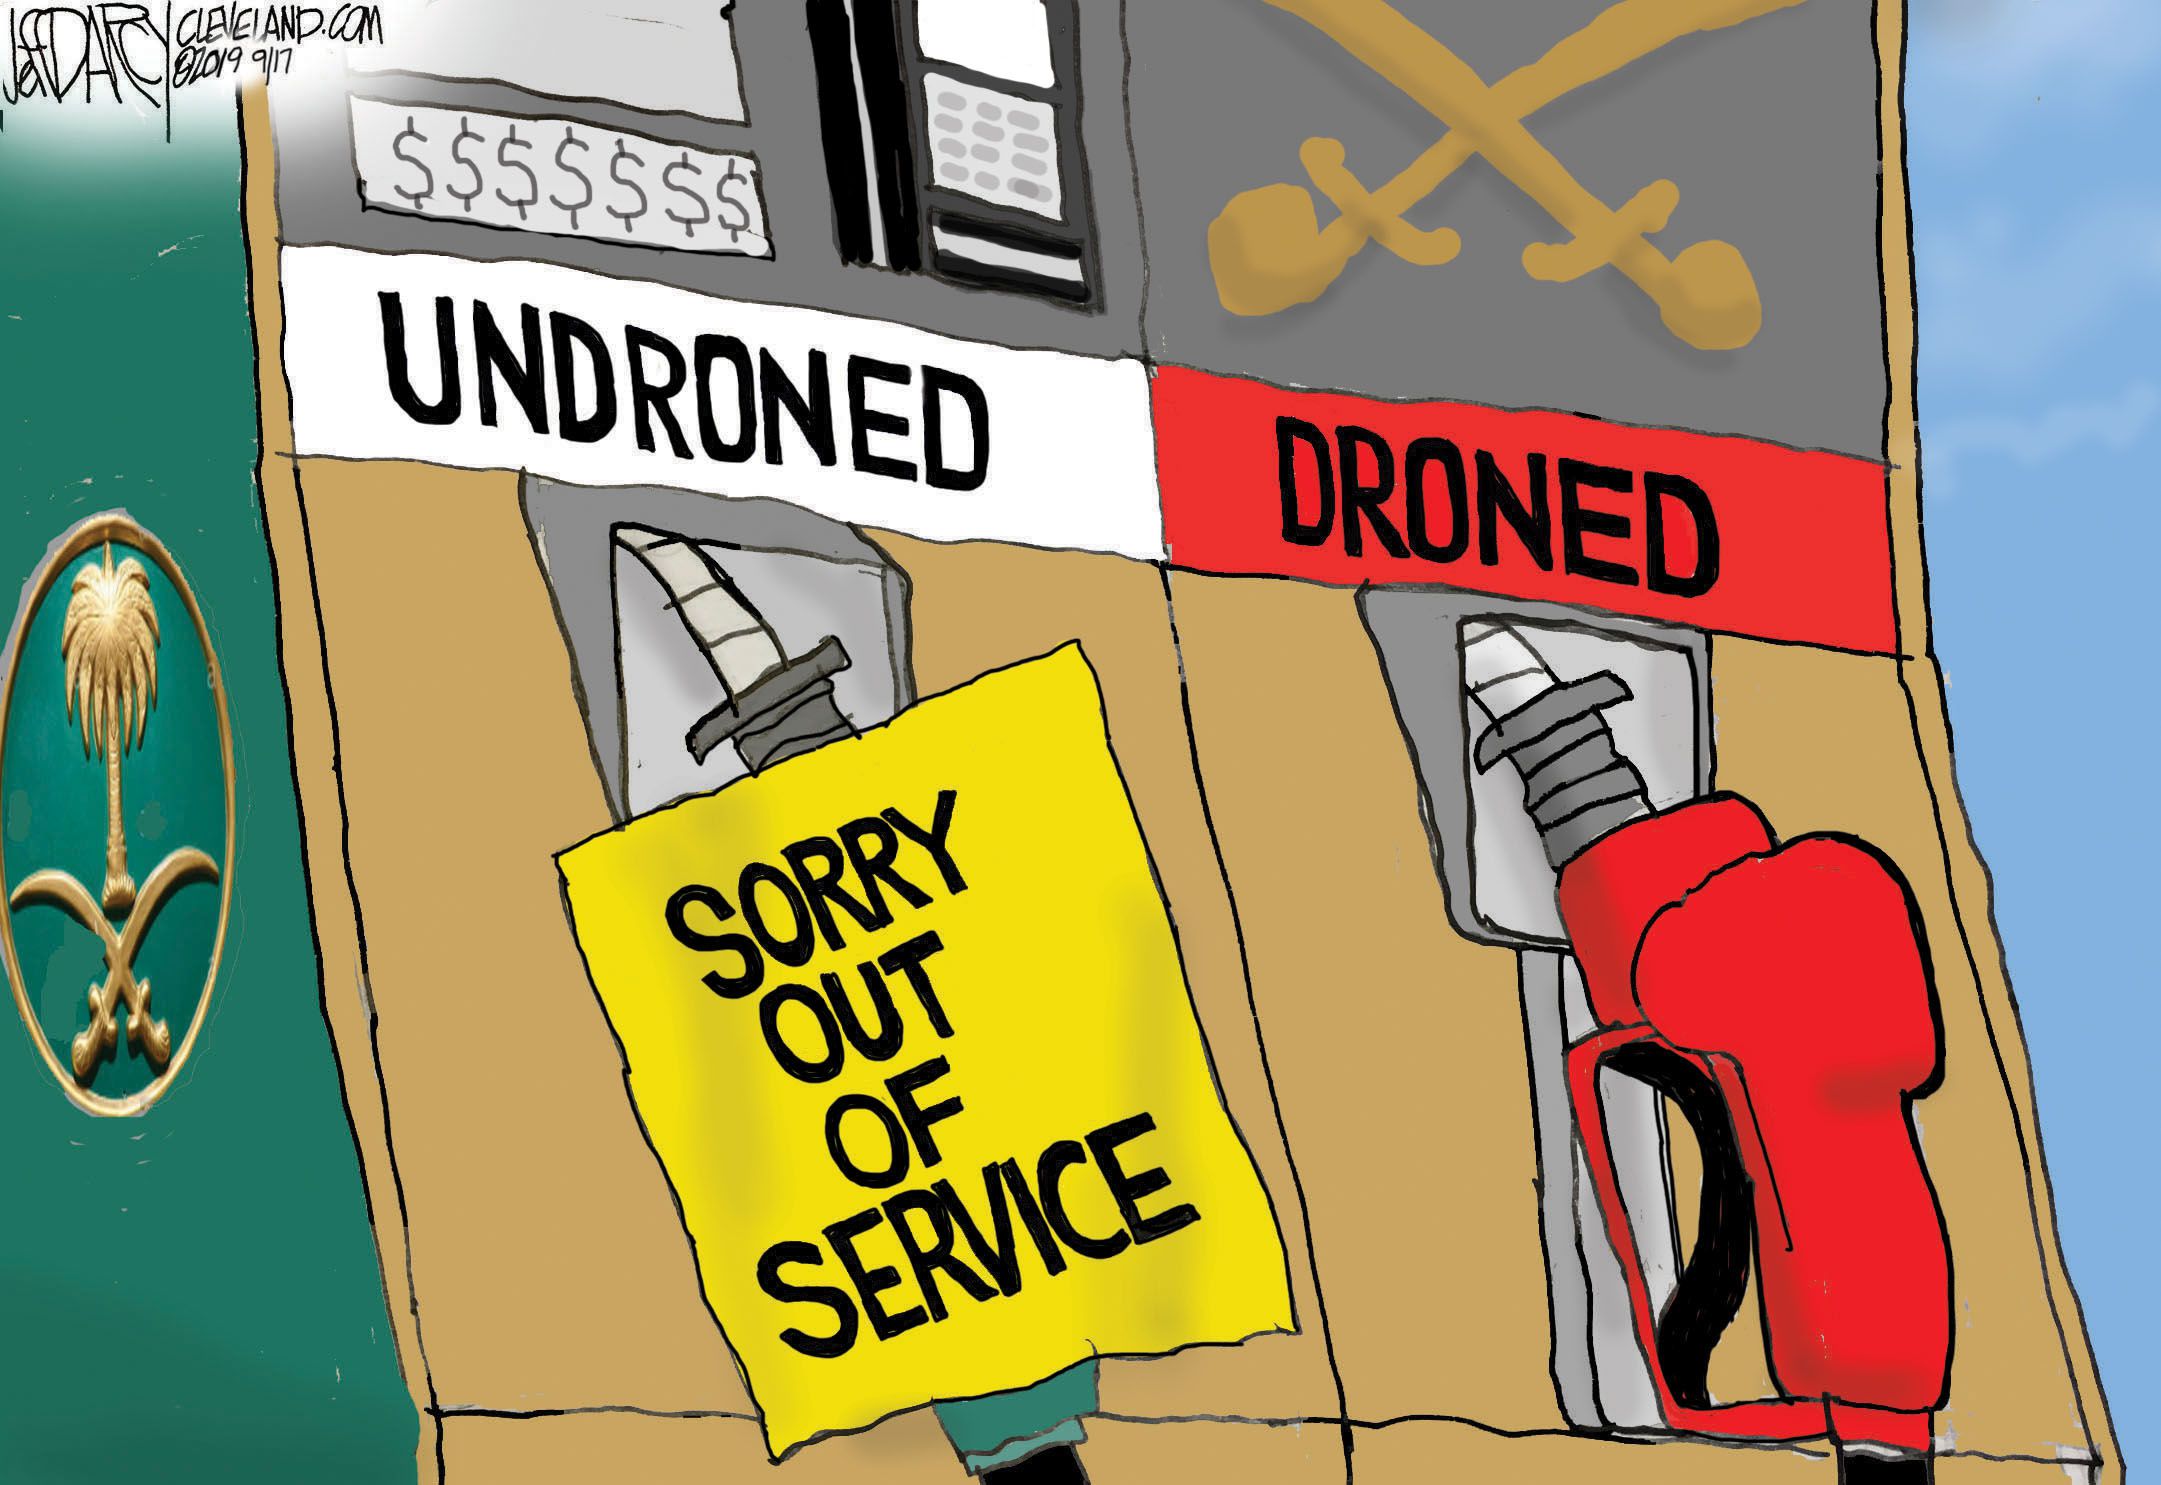 Drone attack adds lead to Saudi oil supply: Darcy cartoon 